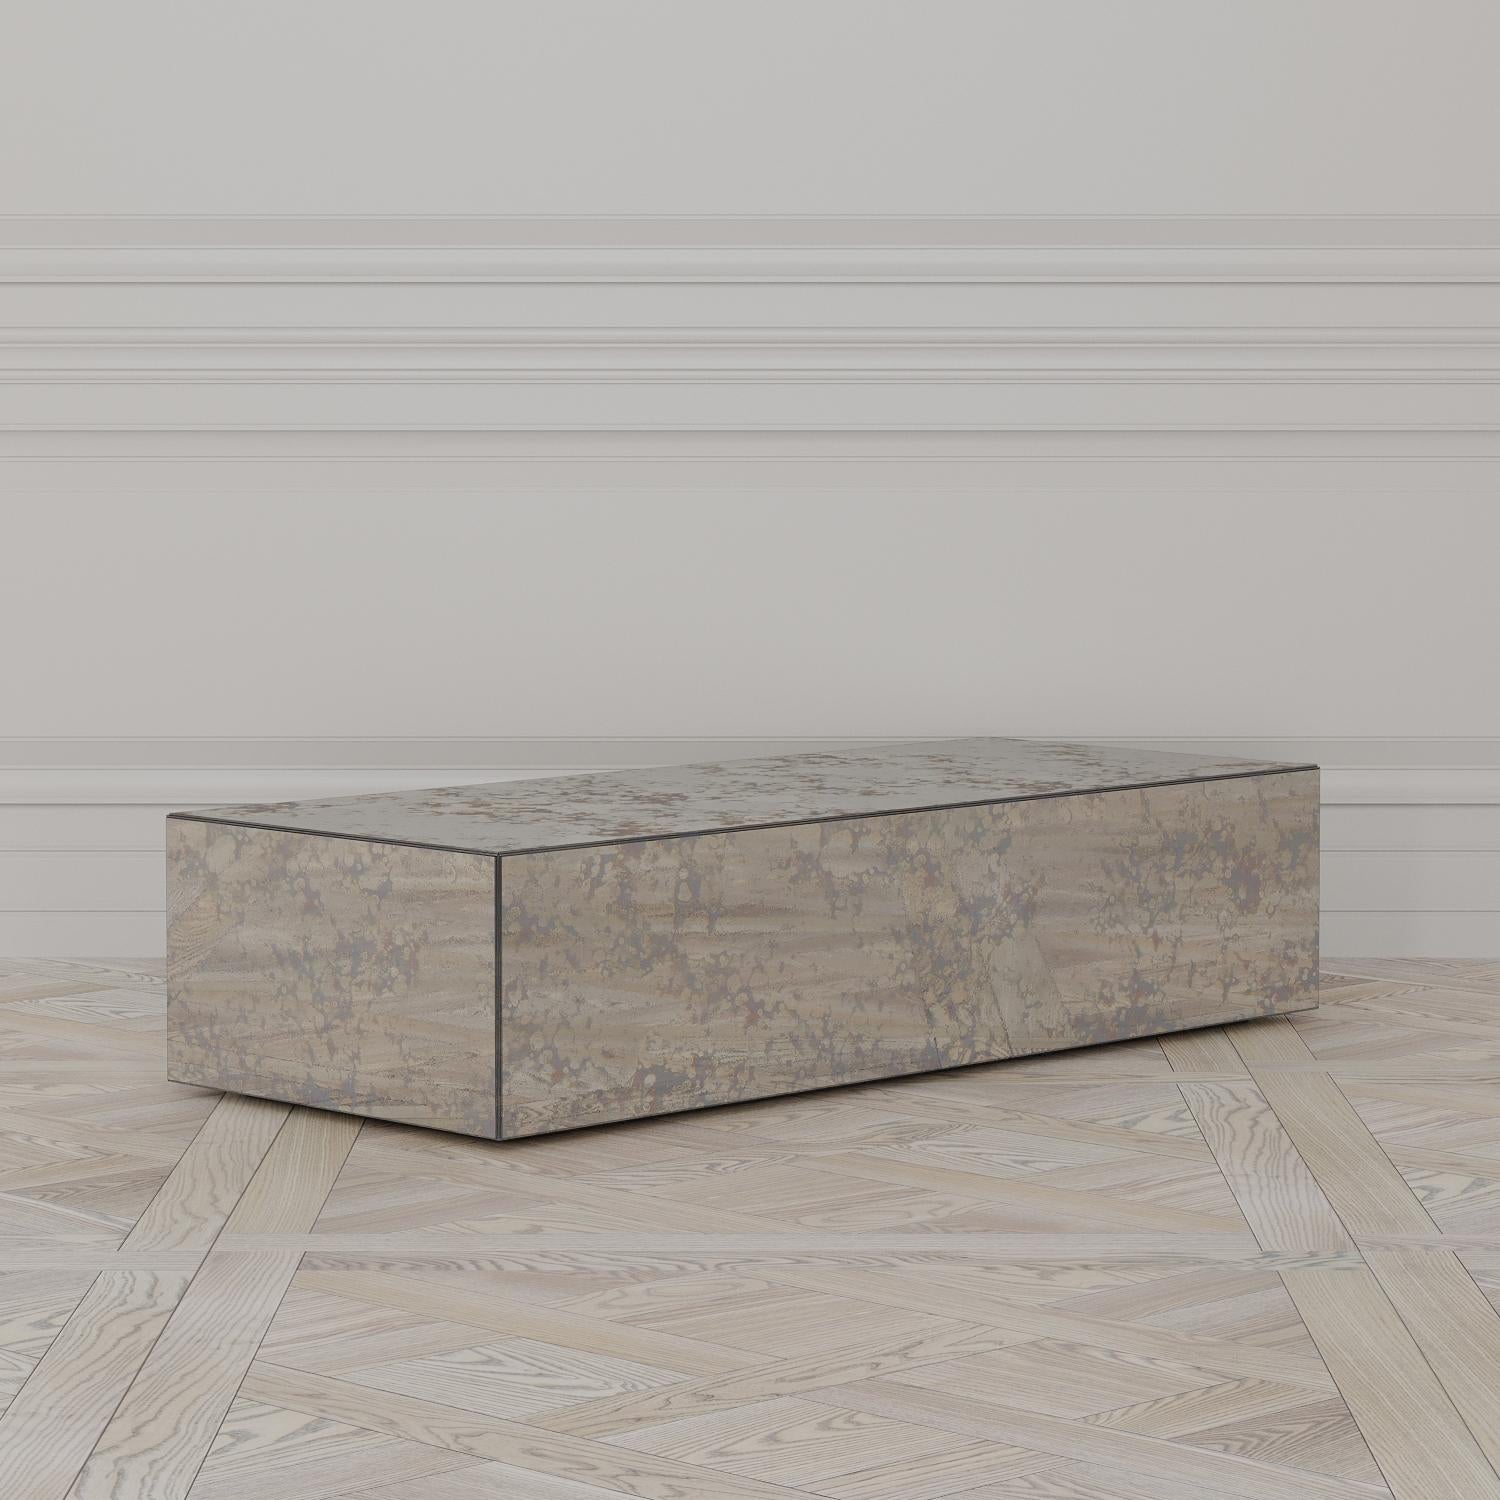 The Lasthour coffee table is designed by Emél & Browne in the Minimalist and contemporary style and custom made in Italy by skilled artisans.

Designed by Emél & Browne in Notting Hill London, the Lasthour coffee table embodies the essence of